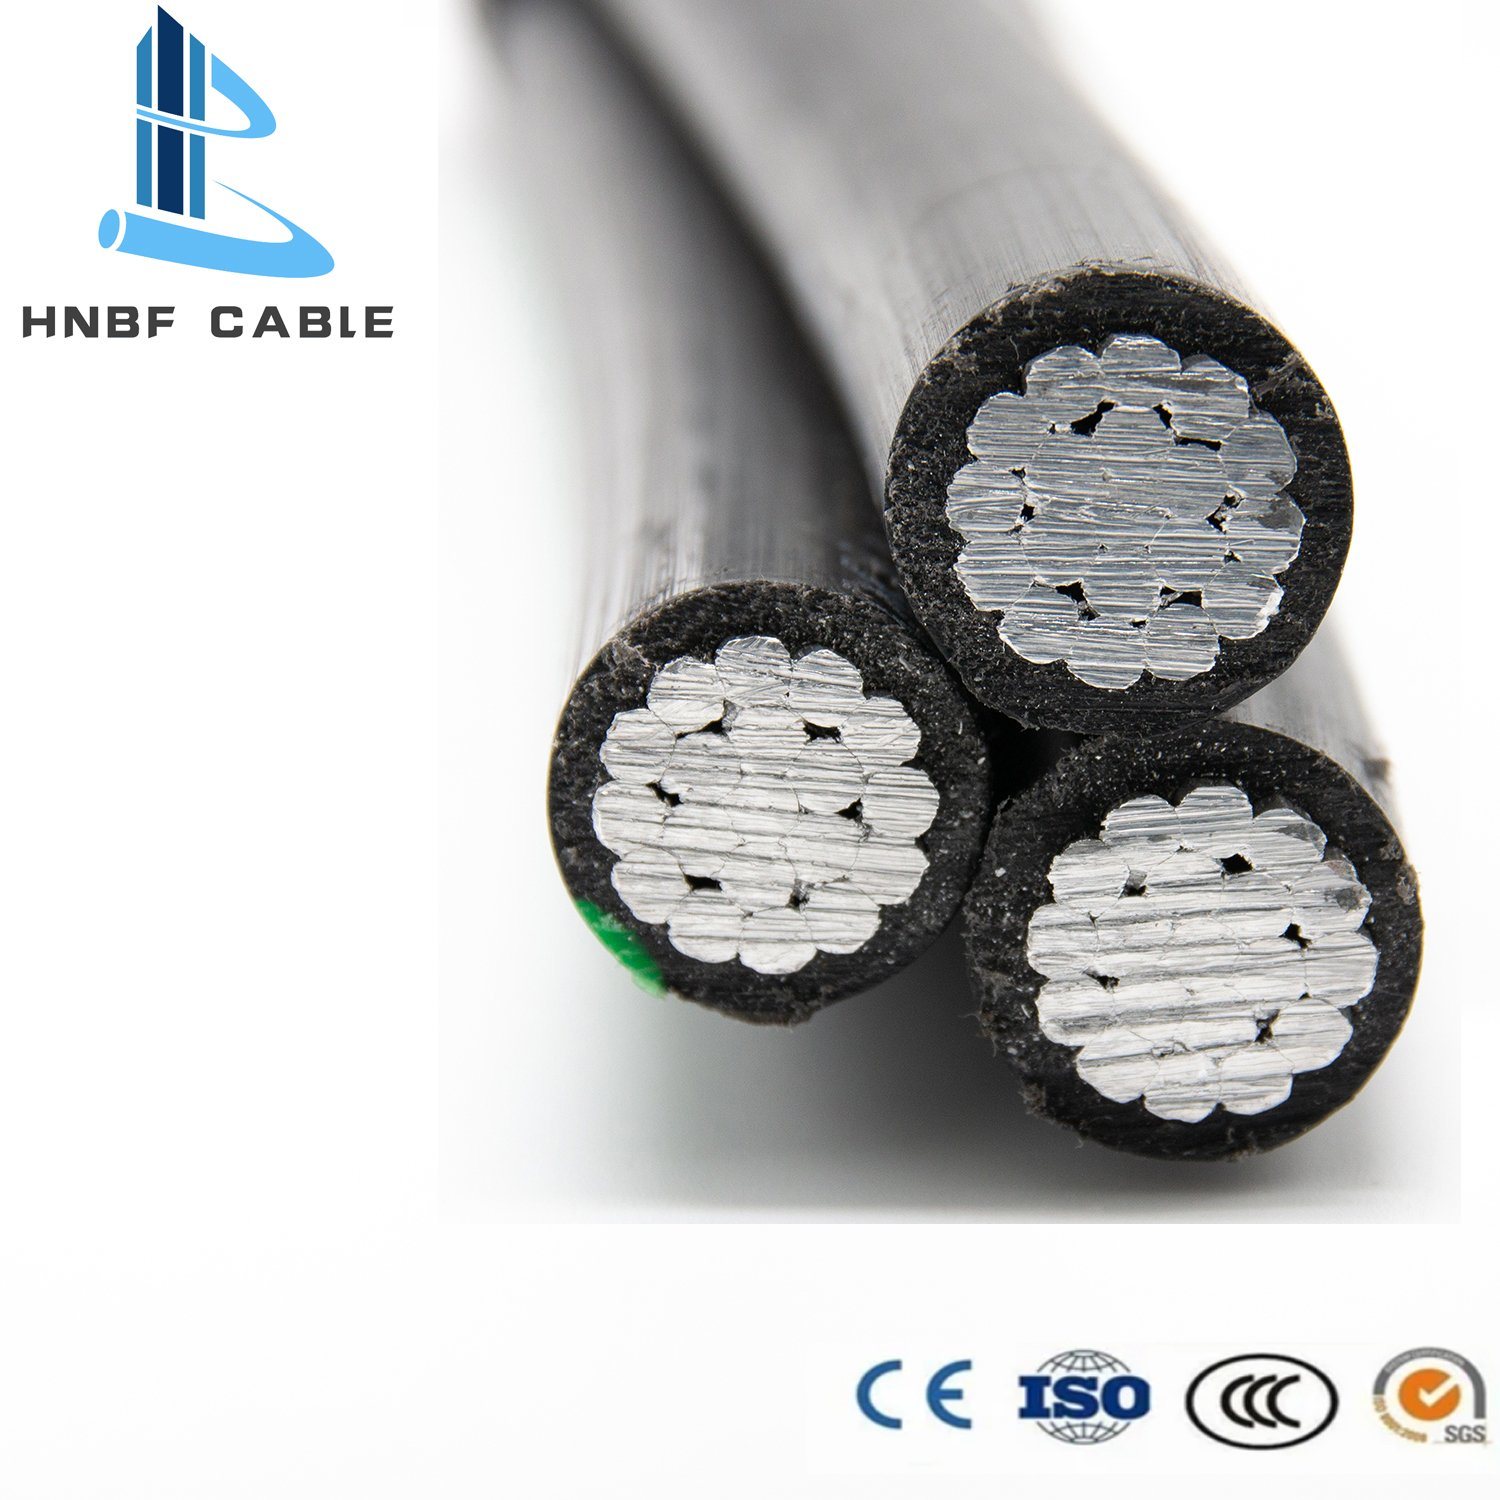 0.6/1kv XLPE PE Insulation Overhead Aerial Aluminum Covered Line Wire ABC 336.4kcmil Cable